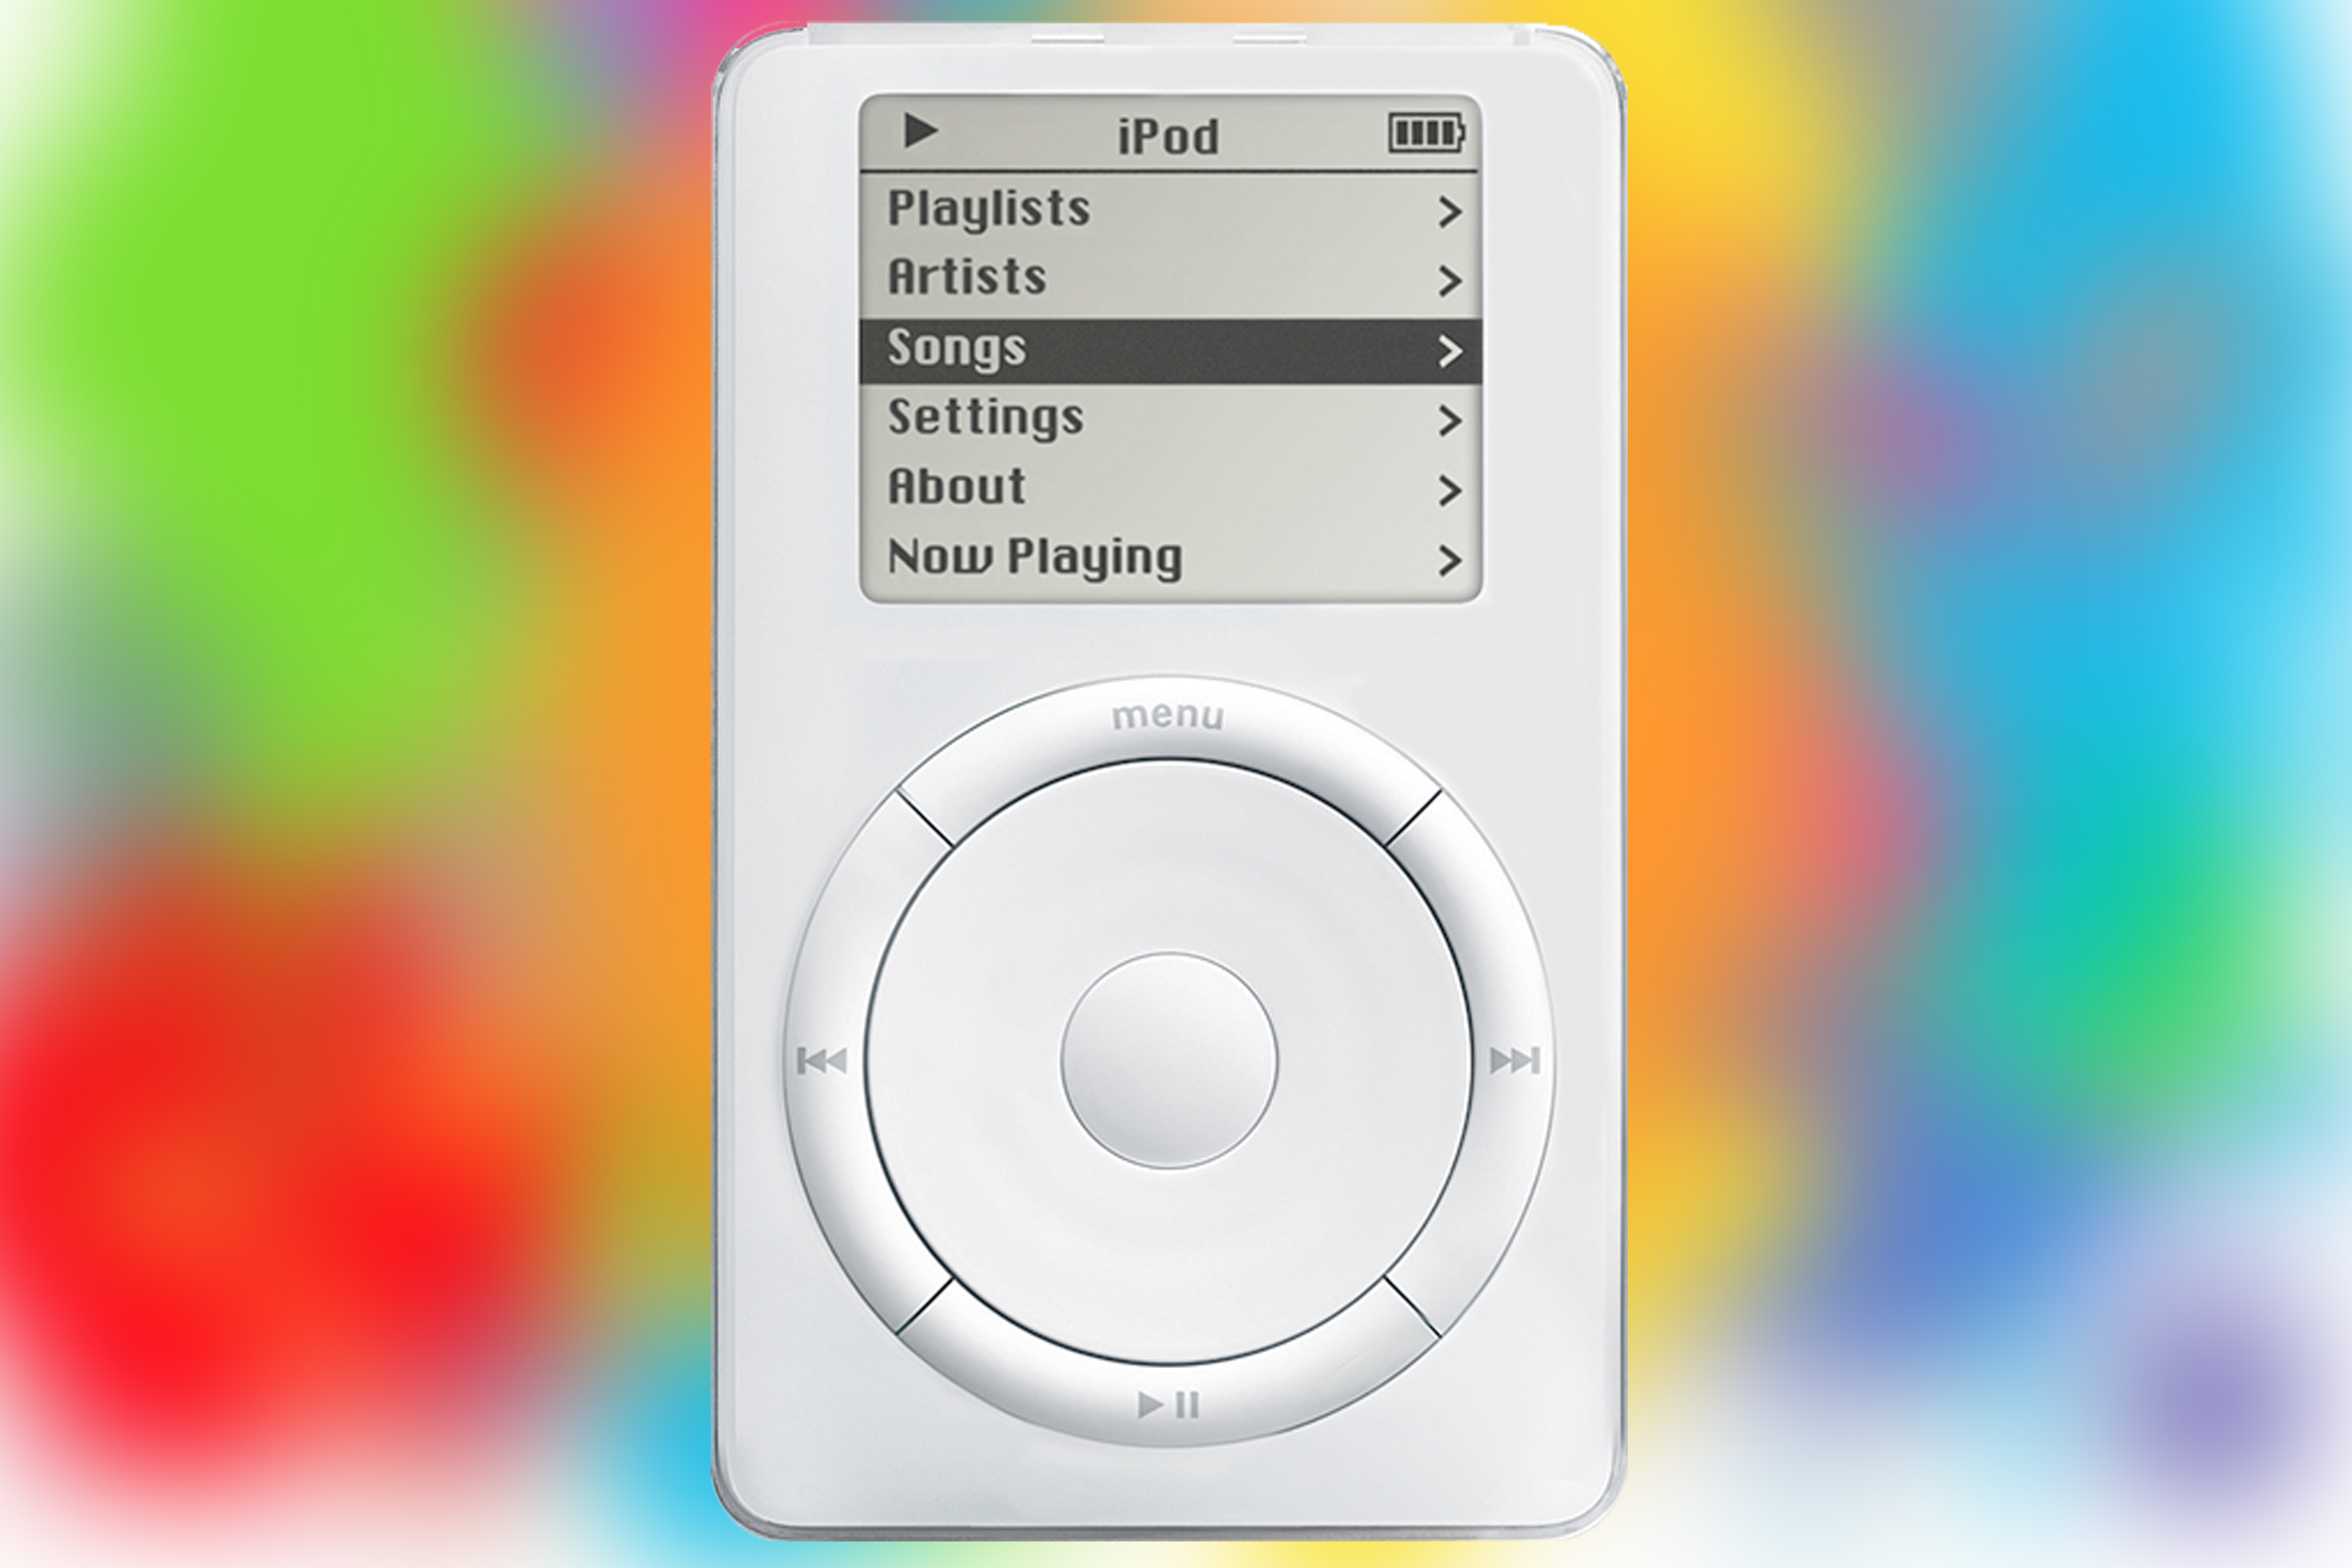 download the last version for ipod Media Player Classic (Home Cinema) 2.1.2